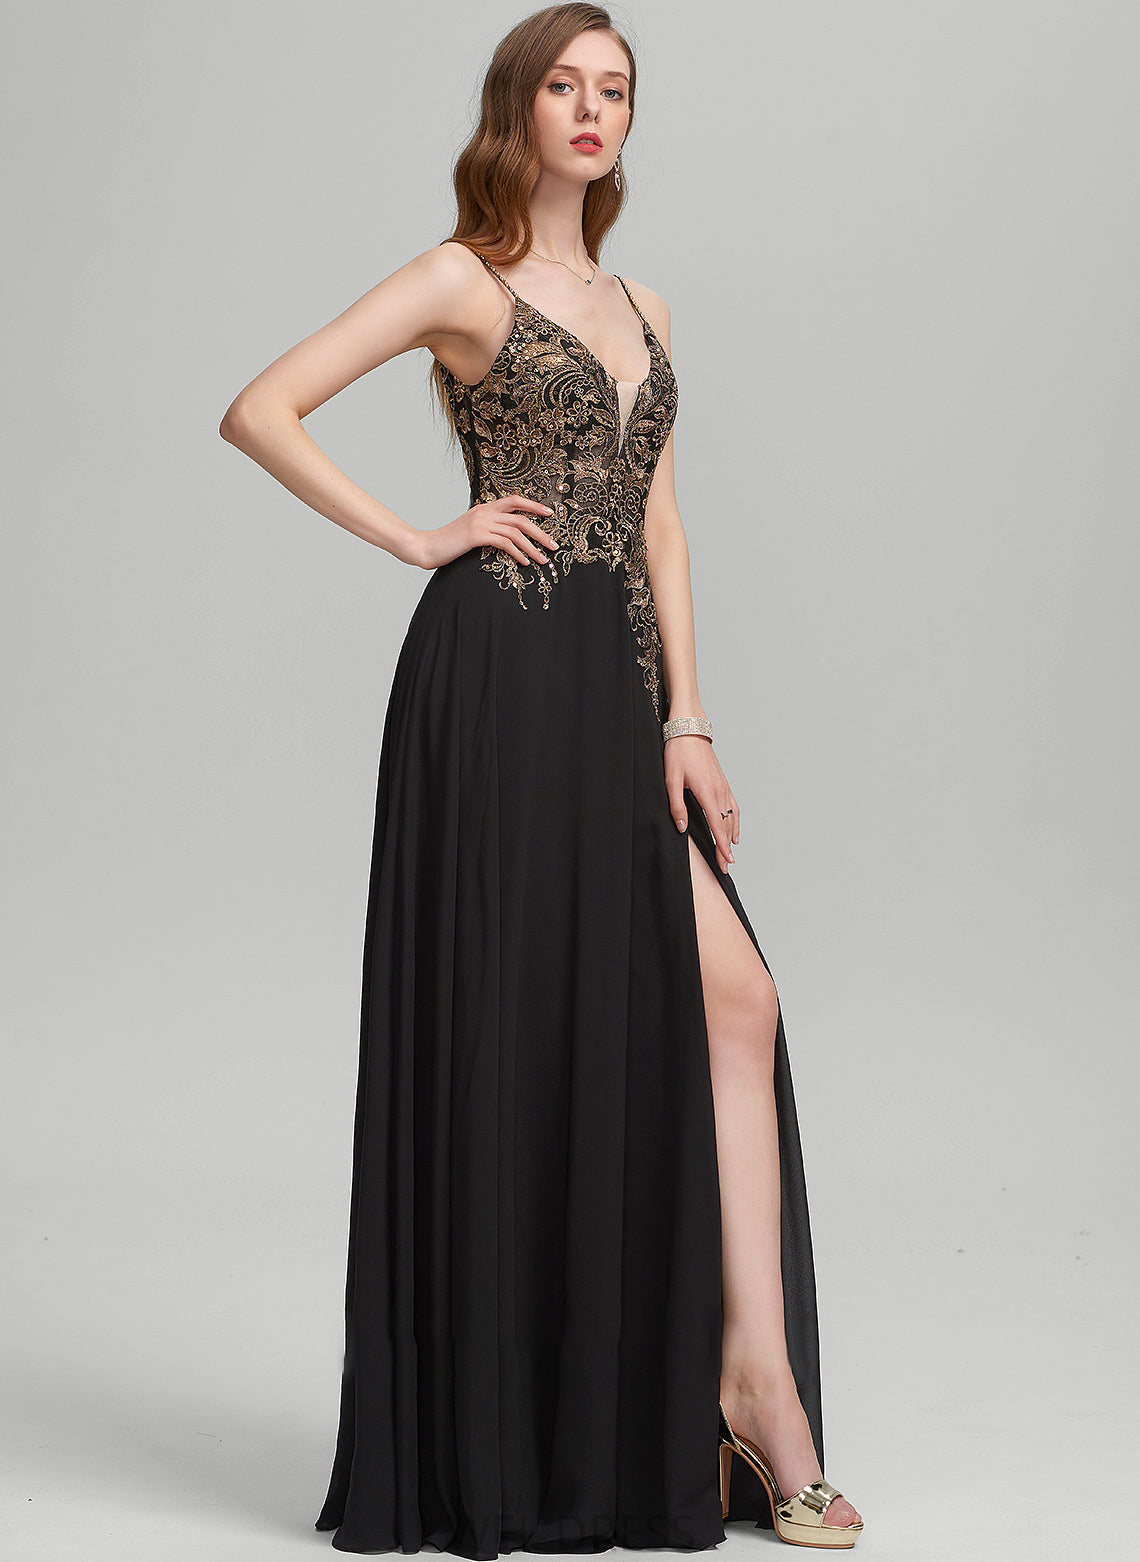 Lace Chiffon Prom Dresses Split With Sequins Floor-Length V-neck A-Line Lydia Front